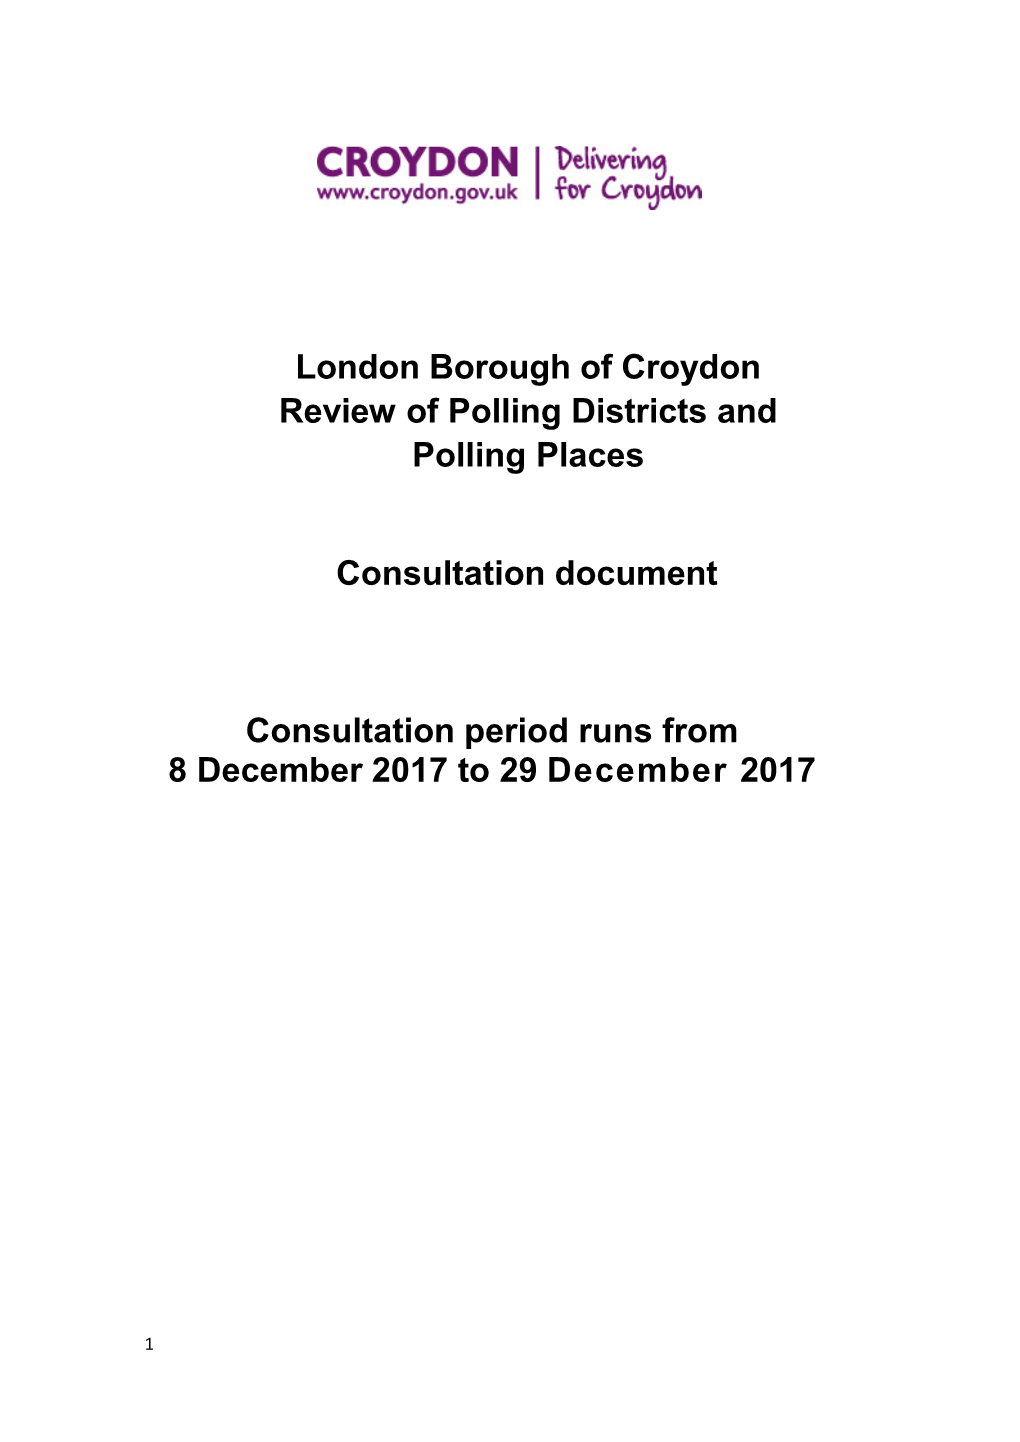 London Borough of Croydon Review of Polling Districts and Polling Places